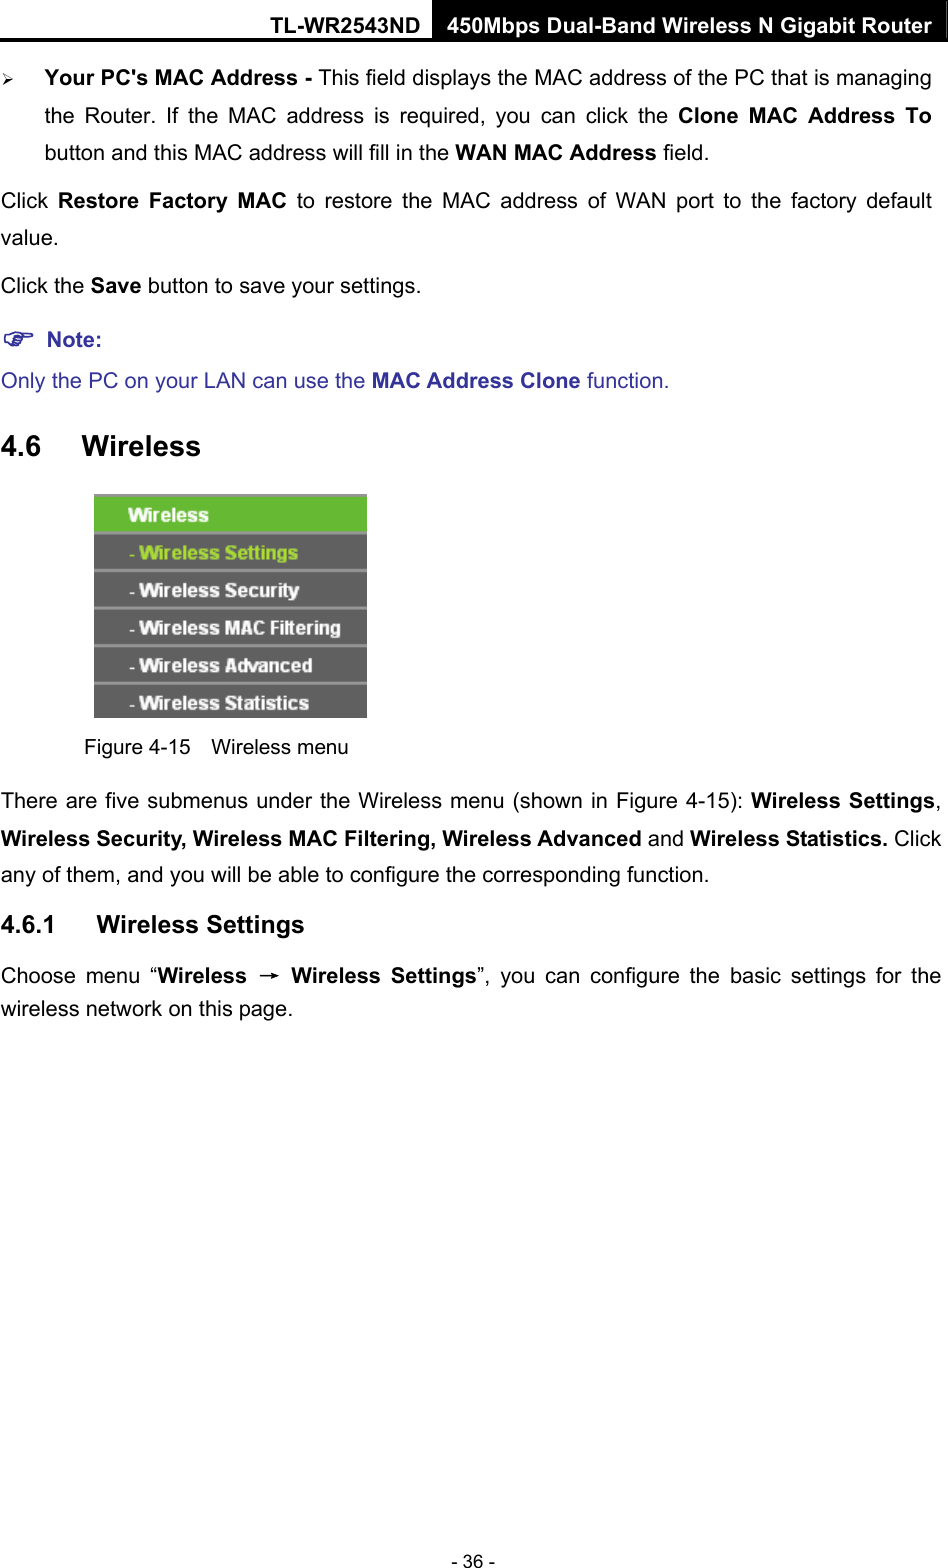 TL-WR2543ND 450Mbps Dual-Band Wireless N Gigabit Router - 36 - ¾ Your PC&apos;s MAC Address - This field displays the MAC address of the PC that is managing the Router. If the MAC address is required, you can click the Clone MAC Address To button and this MAC address will fill in the WAN MAC Address field. Click  Restore Factory MAC to restore the MAC address of WAN port to the factory default value. Click the Save button to save your settings. ) Note:  Only the PC on your LAN can use the MAC Address Clone function. 4.6  Wireless  Figure 4-15  Wireless menu There are five submenus under the Wireless menu (shown in Figure 4-15): Wireless Settings, Wireless Security, Wireless MAC Filtering, Wireless Advanced and Wireless Statistics. Click any of them, and you will be able to configure the corresponding function.   4.6.1  Wireless Settings Choose menu “Wireless  → Wireless Settings”, you can configure the basic settings for the wireless network on this page. 